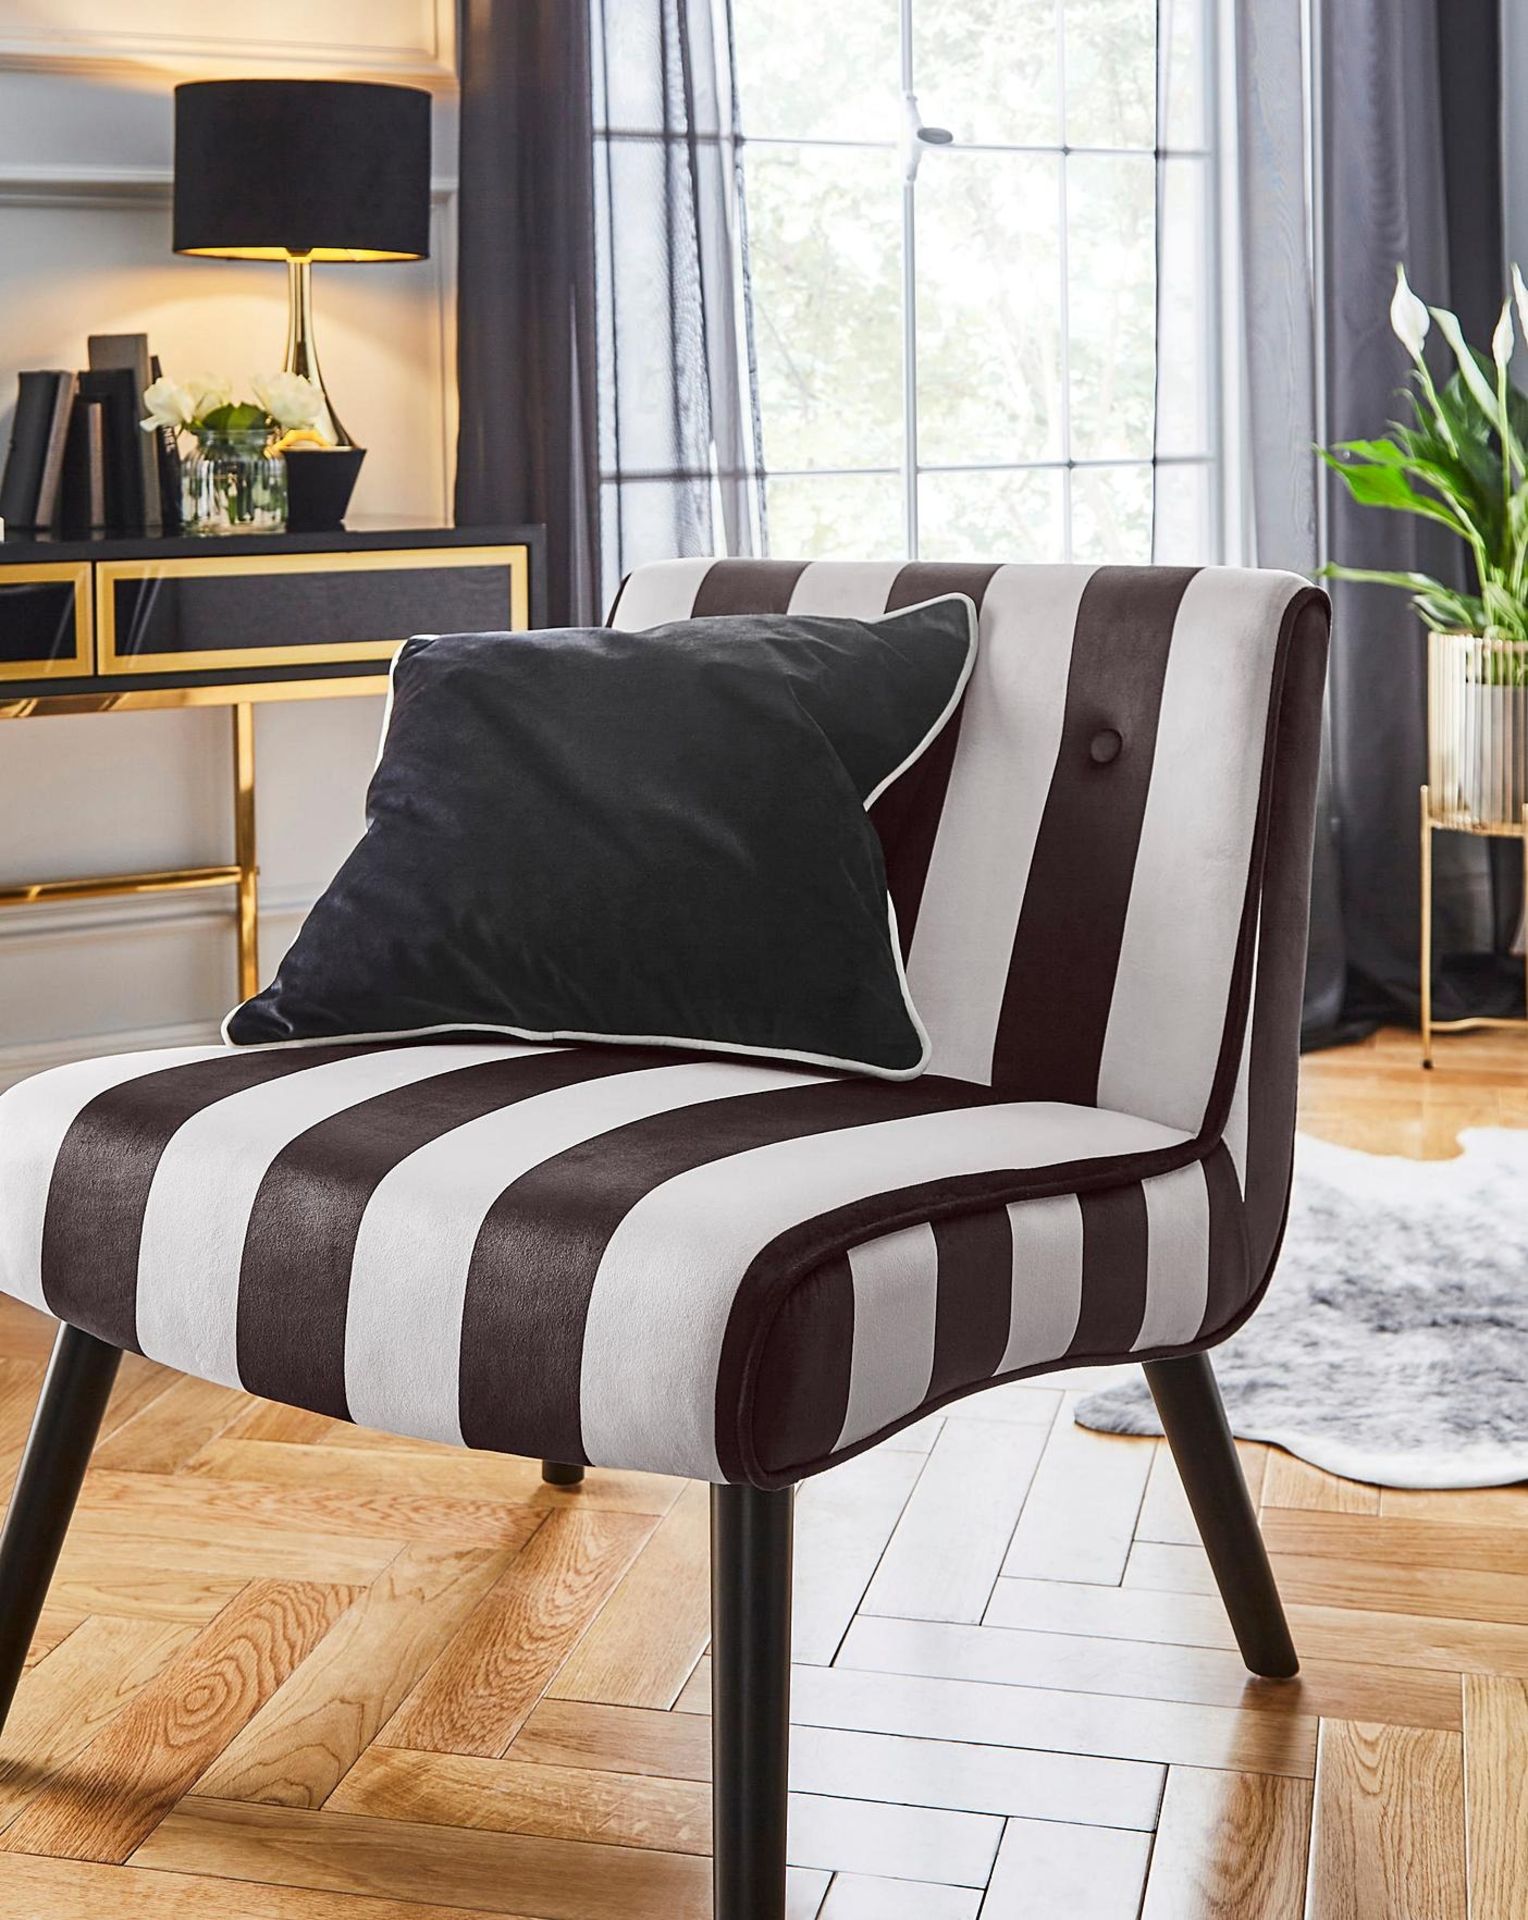 Joanna Hope Eliza Black and White Striped Accent Chair RRP £199.00 (LOCATION H/S 2.7.2)